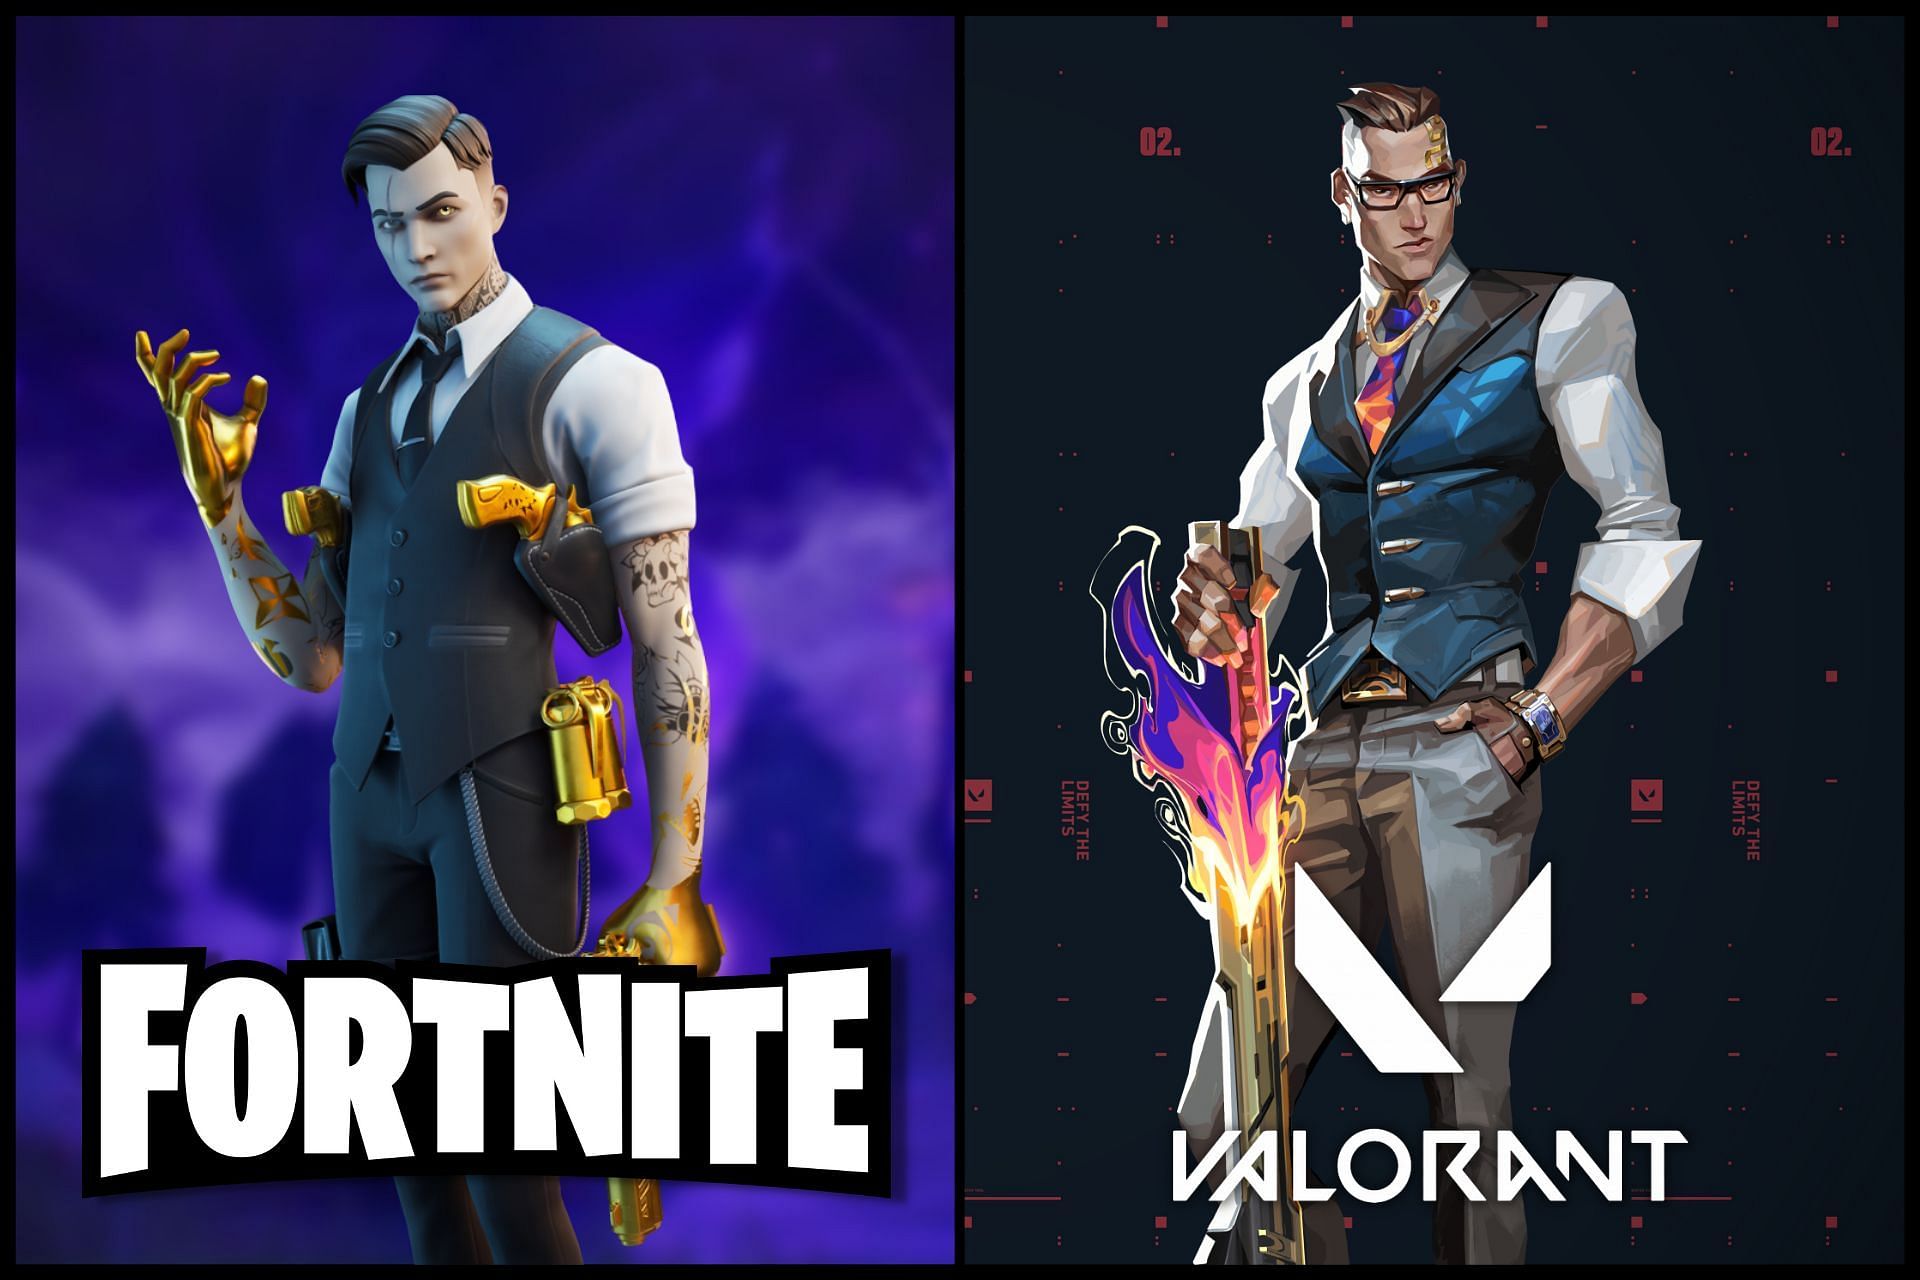 Midas from Fortnite and Chamber from Valorant (Image via Sportskeeda)